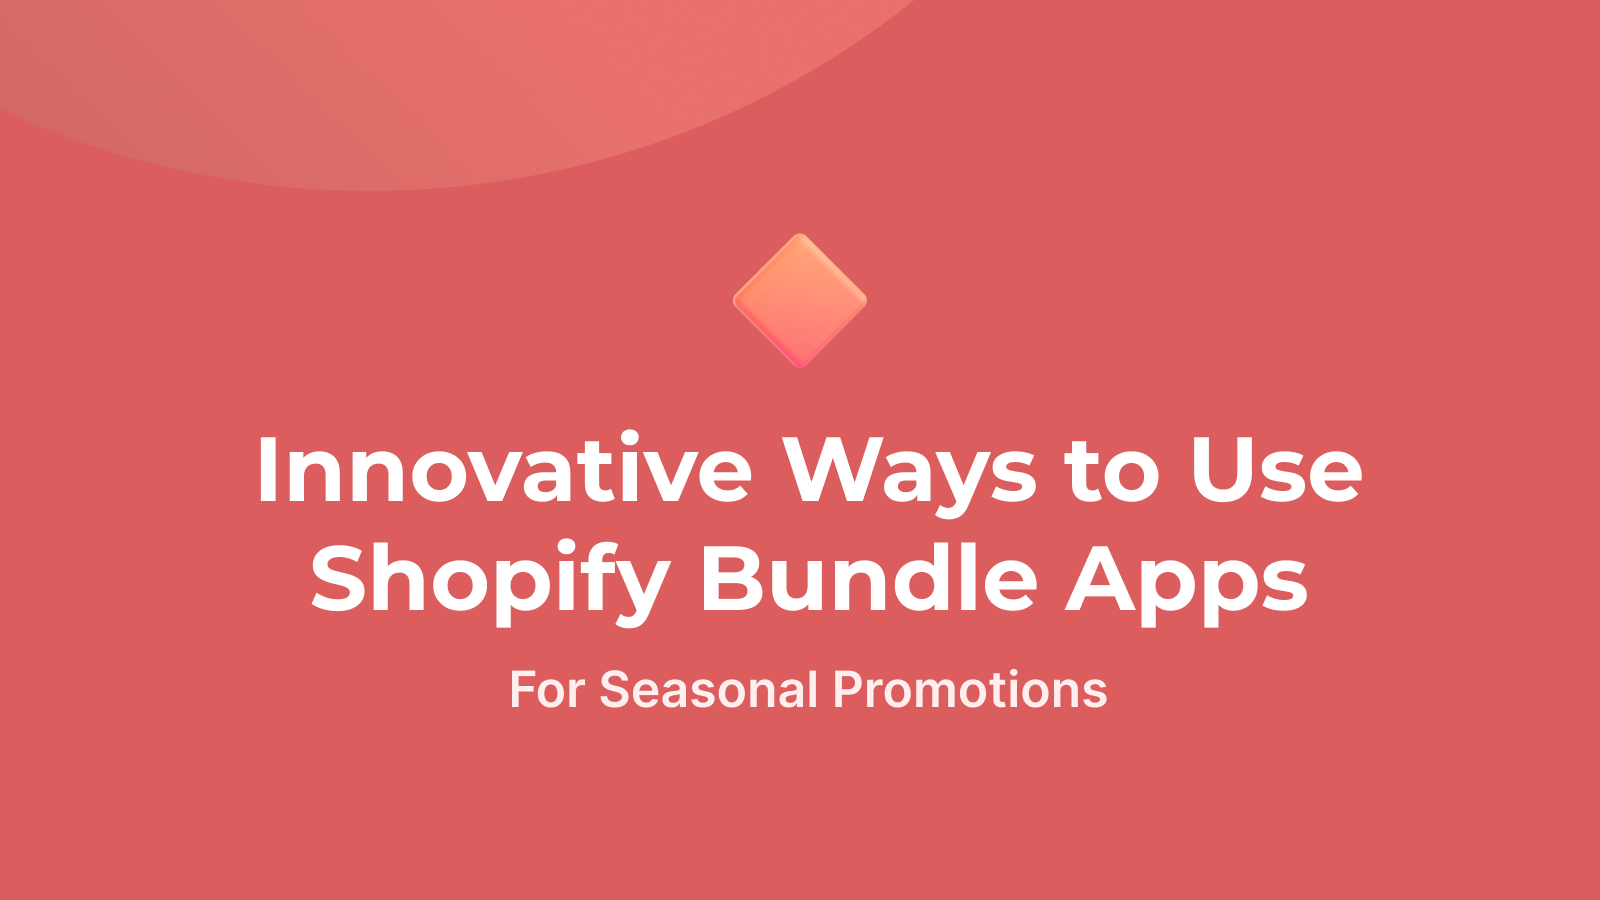 Innovative Ways to Use Shopify Bundle Apps for Seasonal Promotions